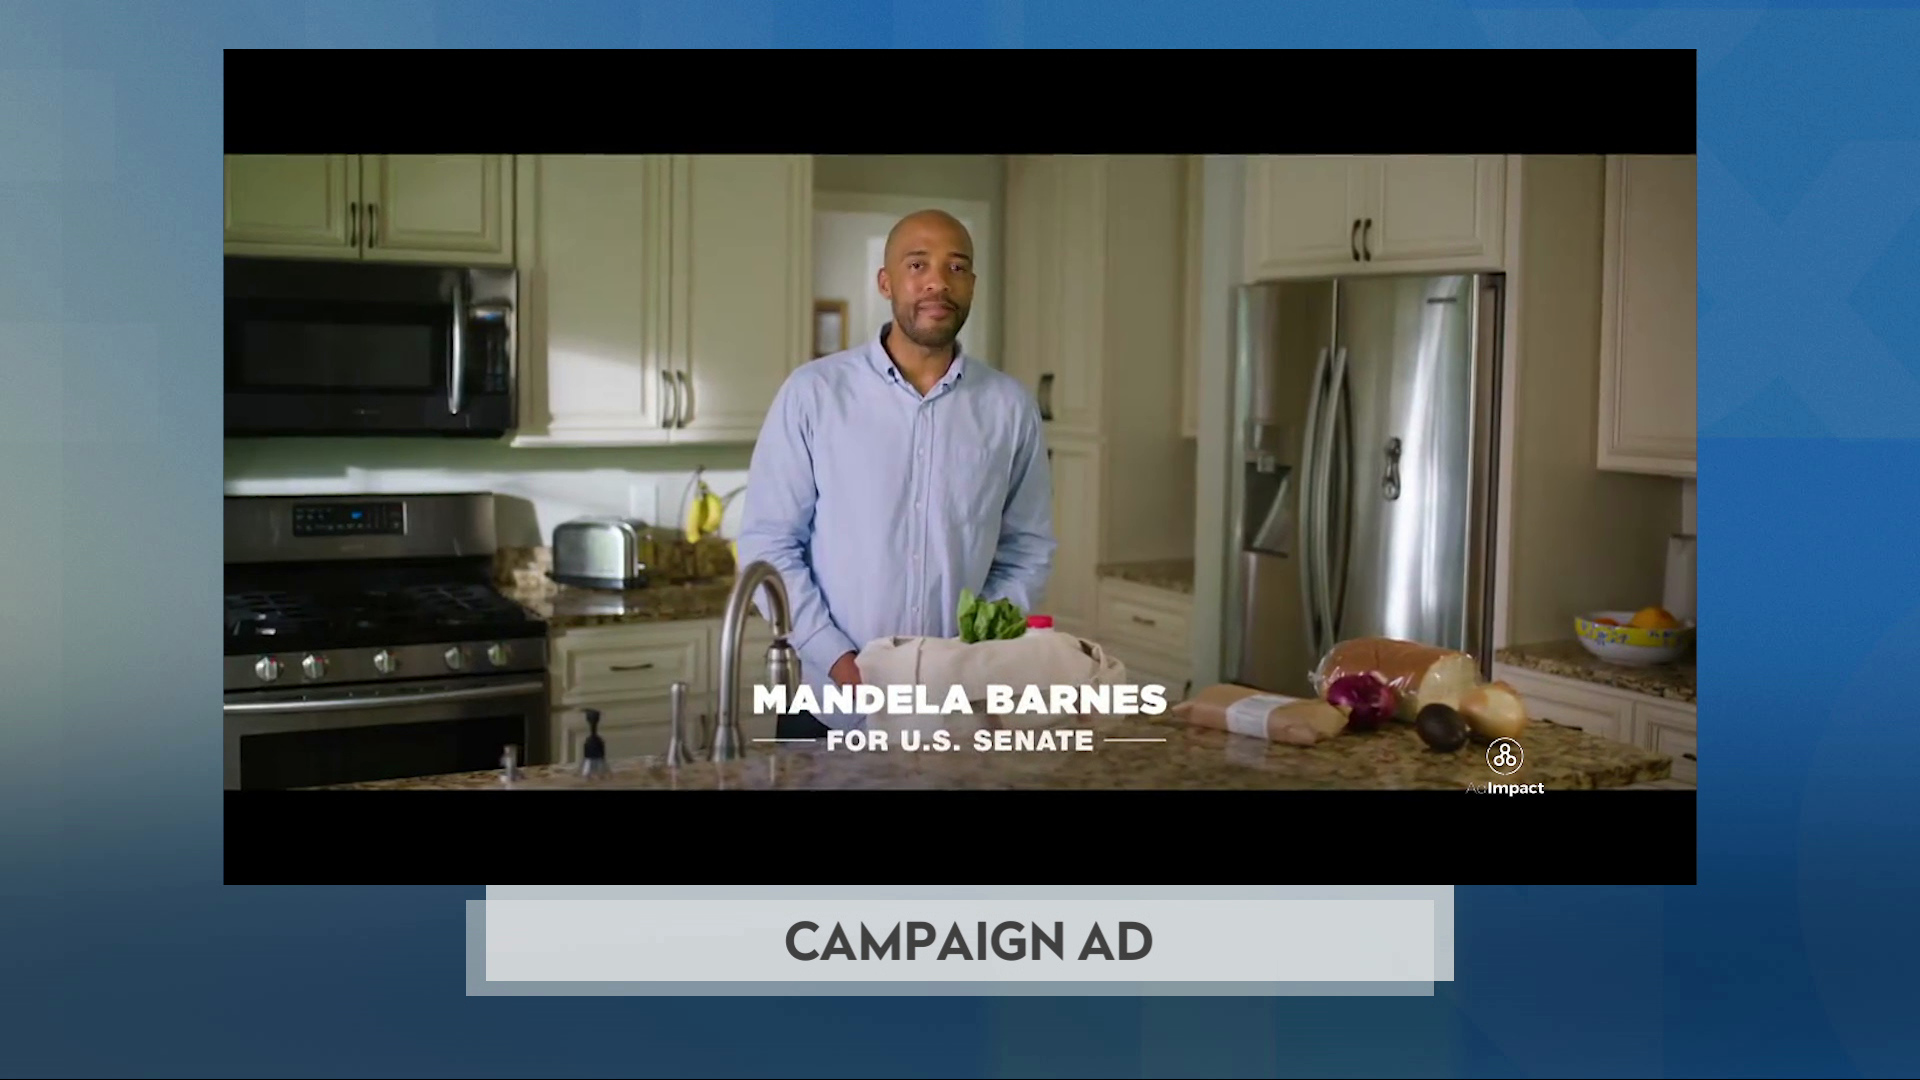 A still image from a political advertisement shows Mandel Barnes standing behind a kitchen counter with a sink and grocery items in a bag and sitting on the countertop, with an oven and microwave, refrigerator, painted cupboards and other kitchen items in the background and superimposed with the words "Mandela Barnes For U.S. Senate."